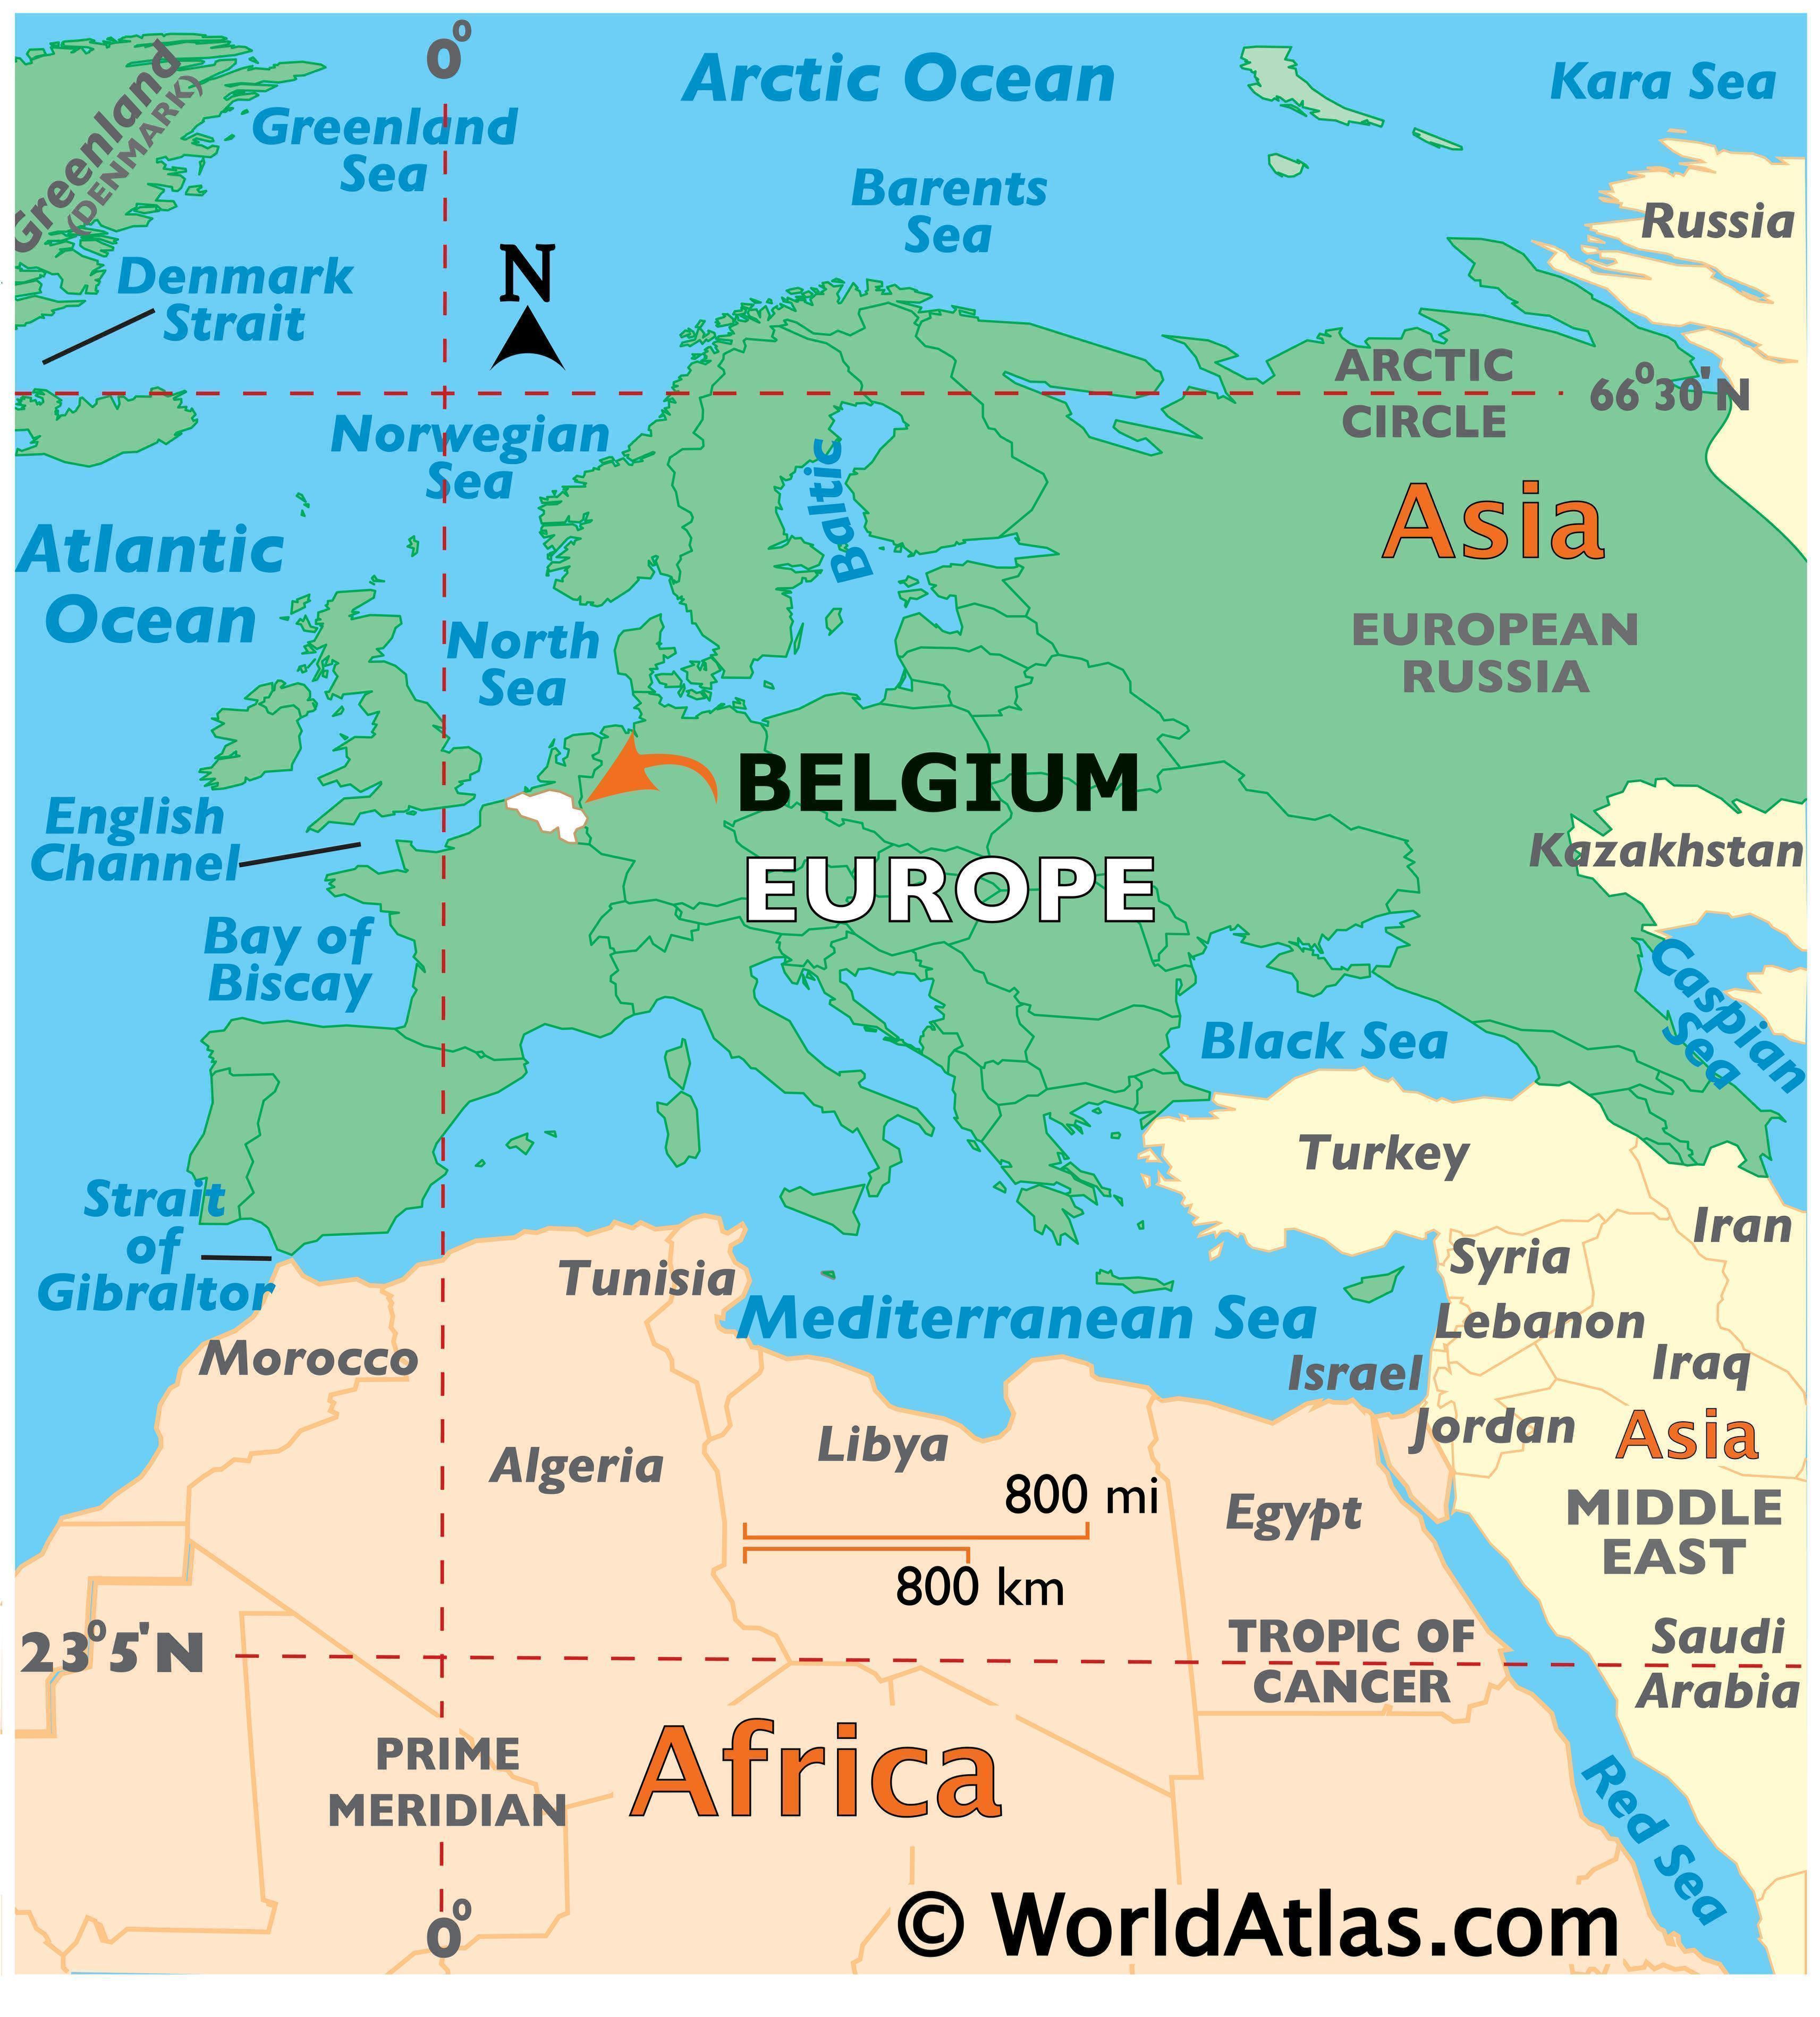 show belgium on map of europe Map Of Belgium European Maps Europe Maps Belgium Map show belgium on map of europe